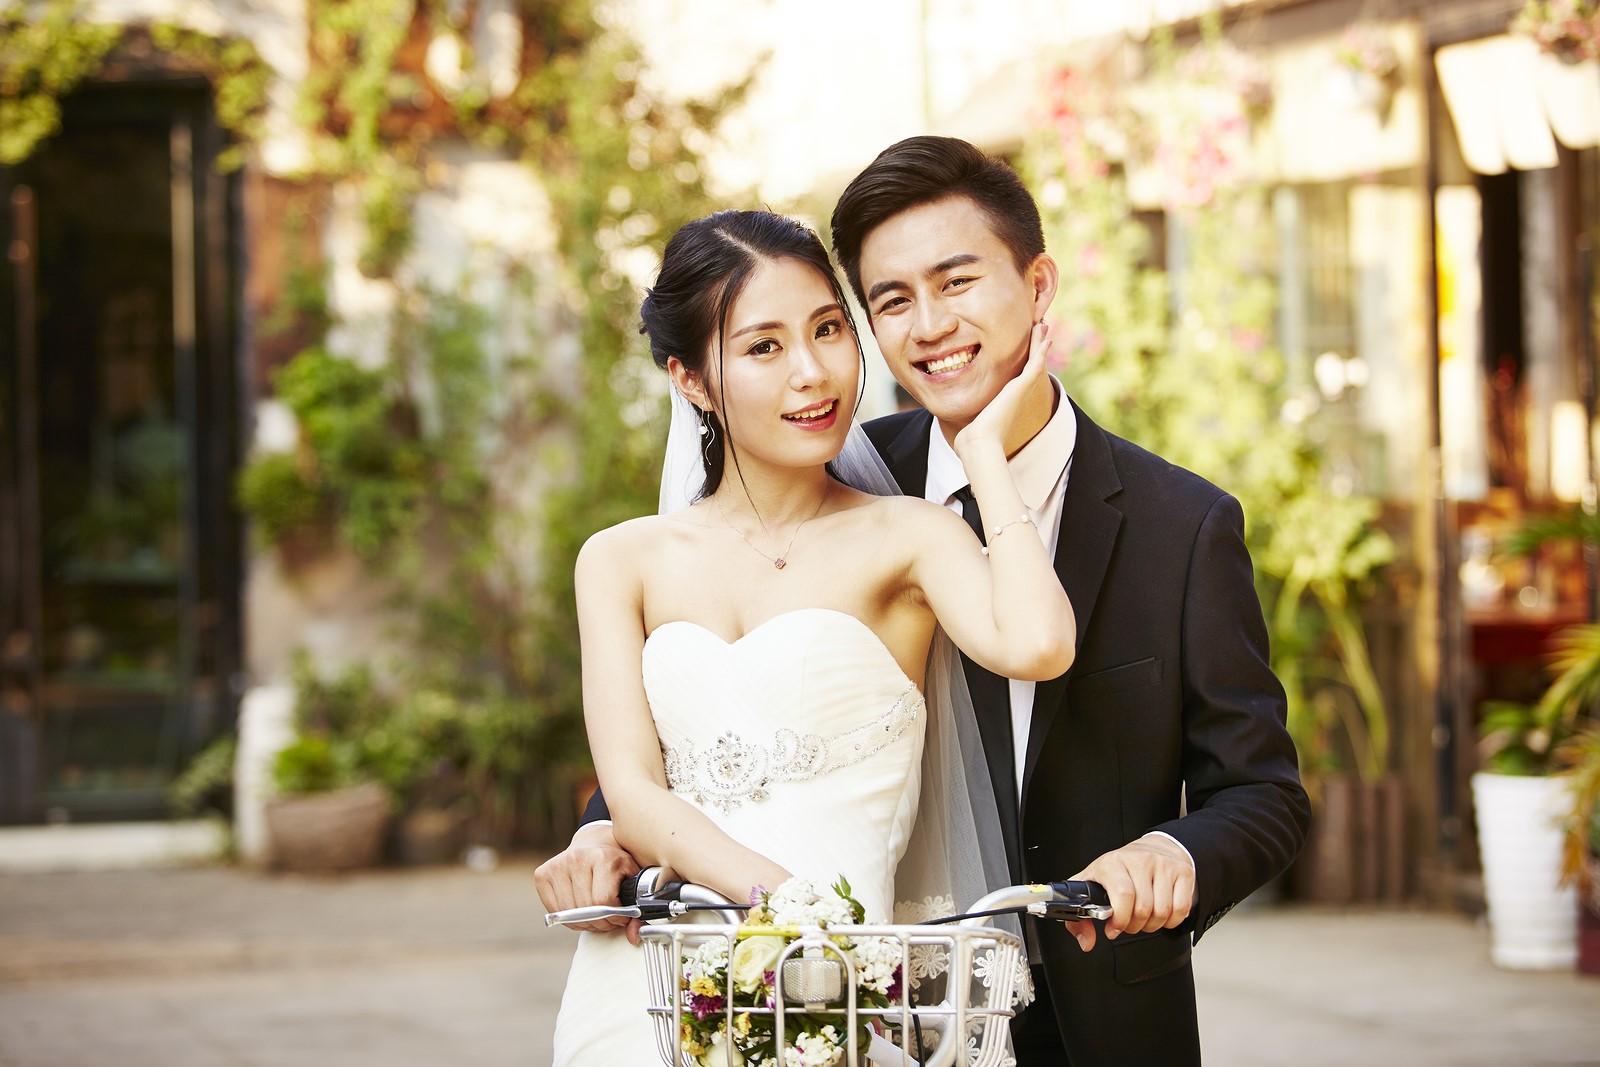 4 Reasons Why You Should Have a Pre-Wedding Photoshoot